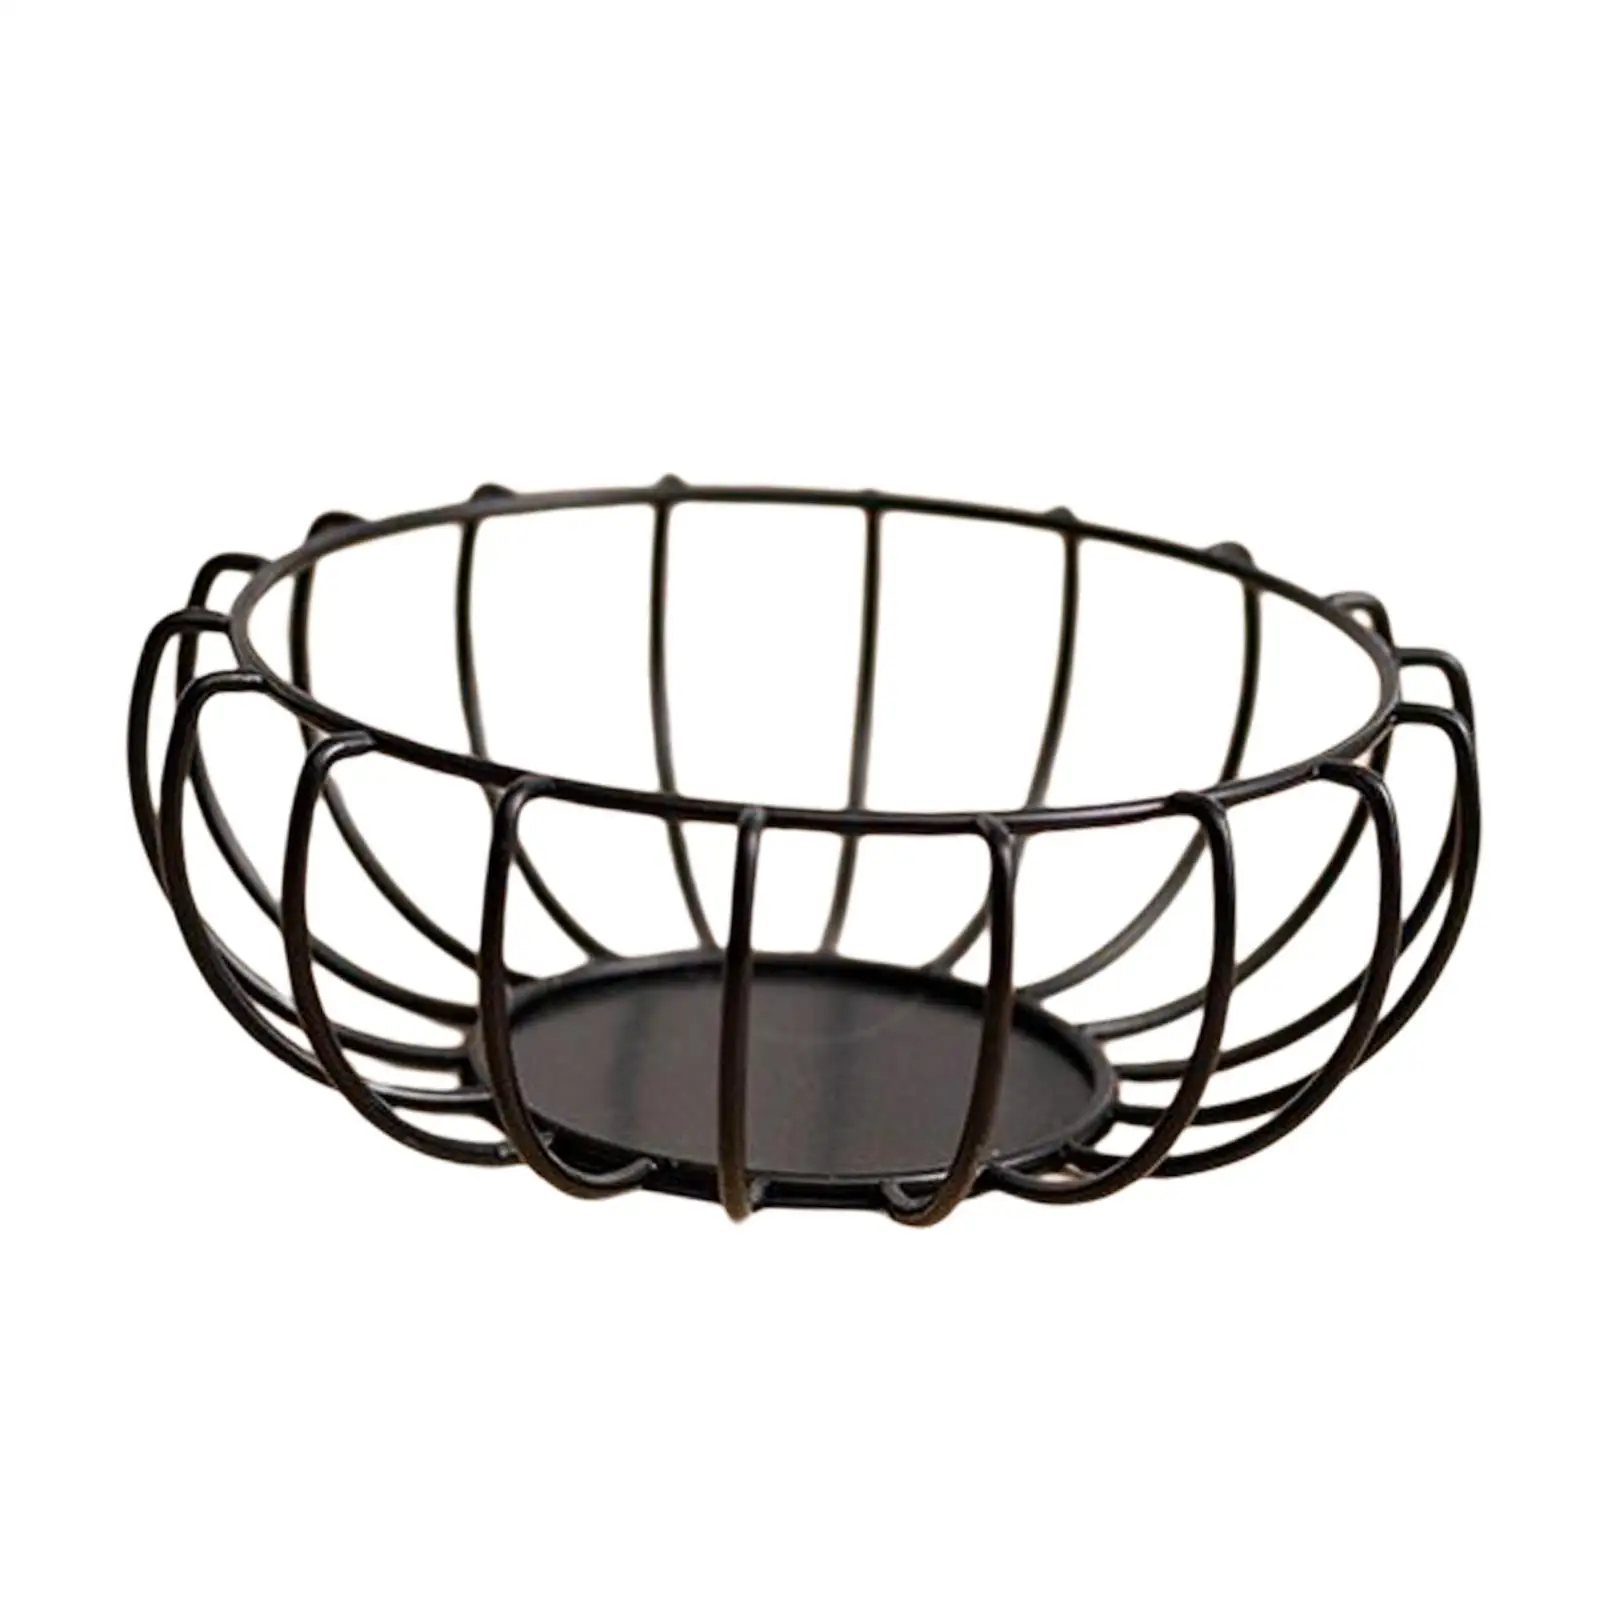 Metal Fruit Basket Bowl Stand Container for Sundries Dinner Table Tabletop